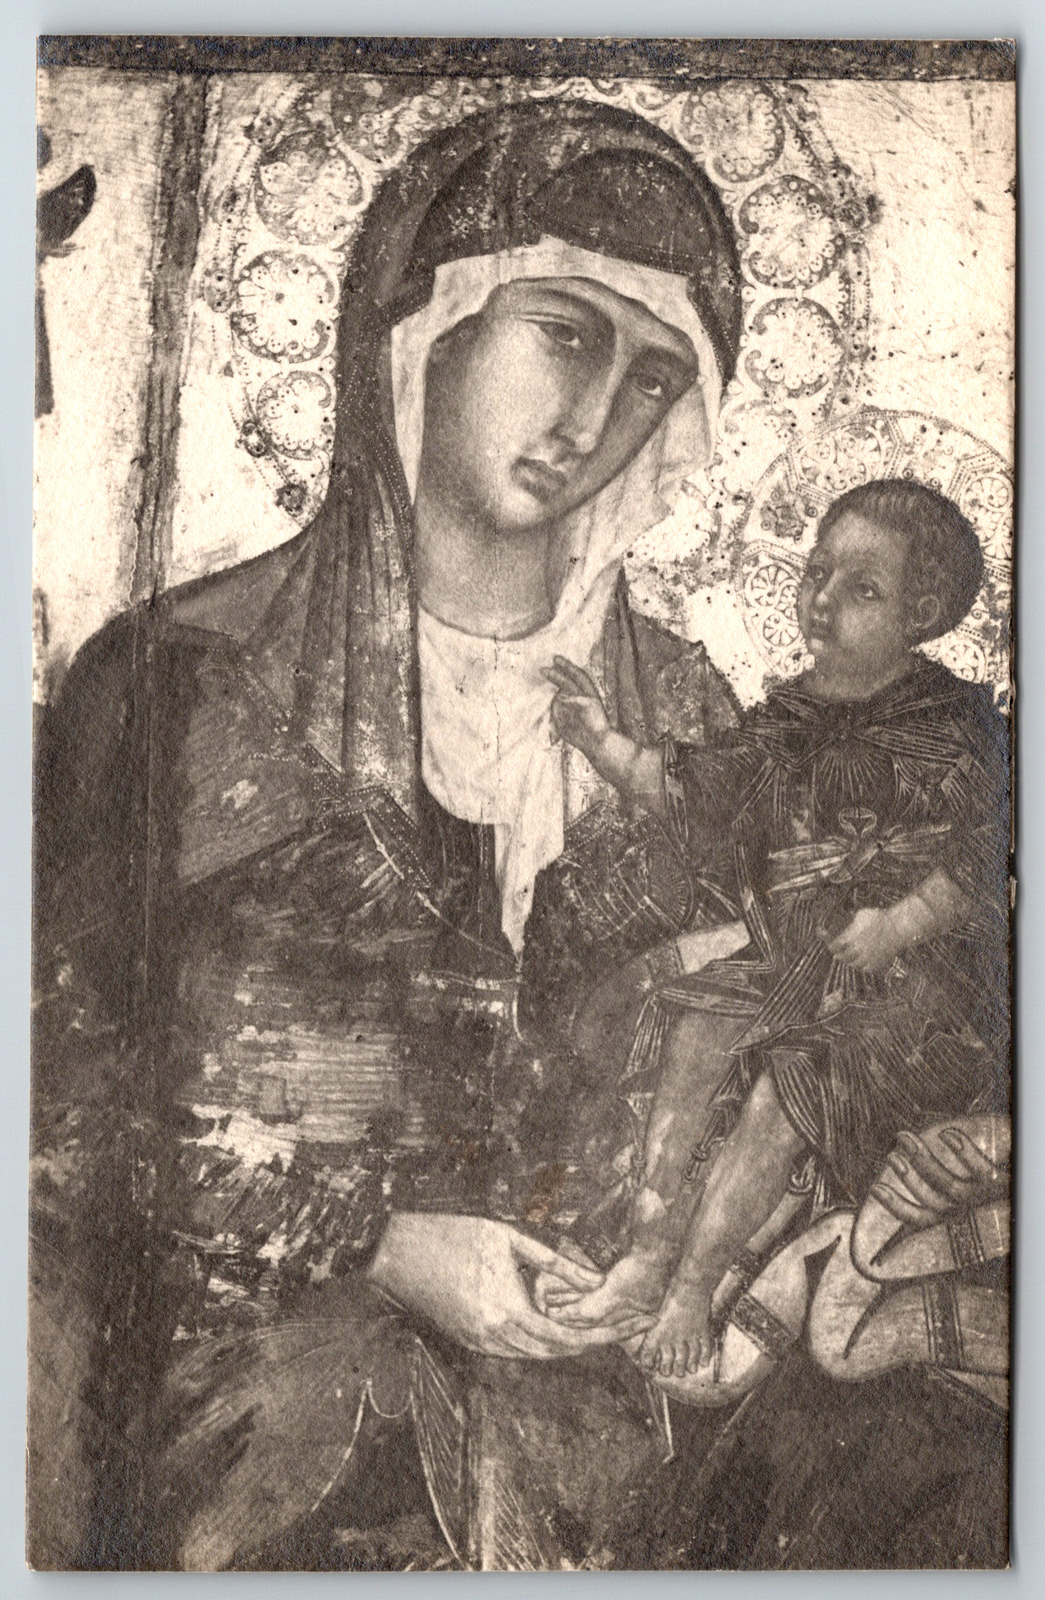 c1950s Depiction of the Virgin Mary Art Vintage Postcard